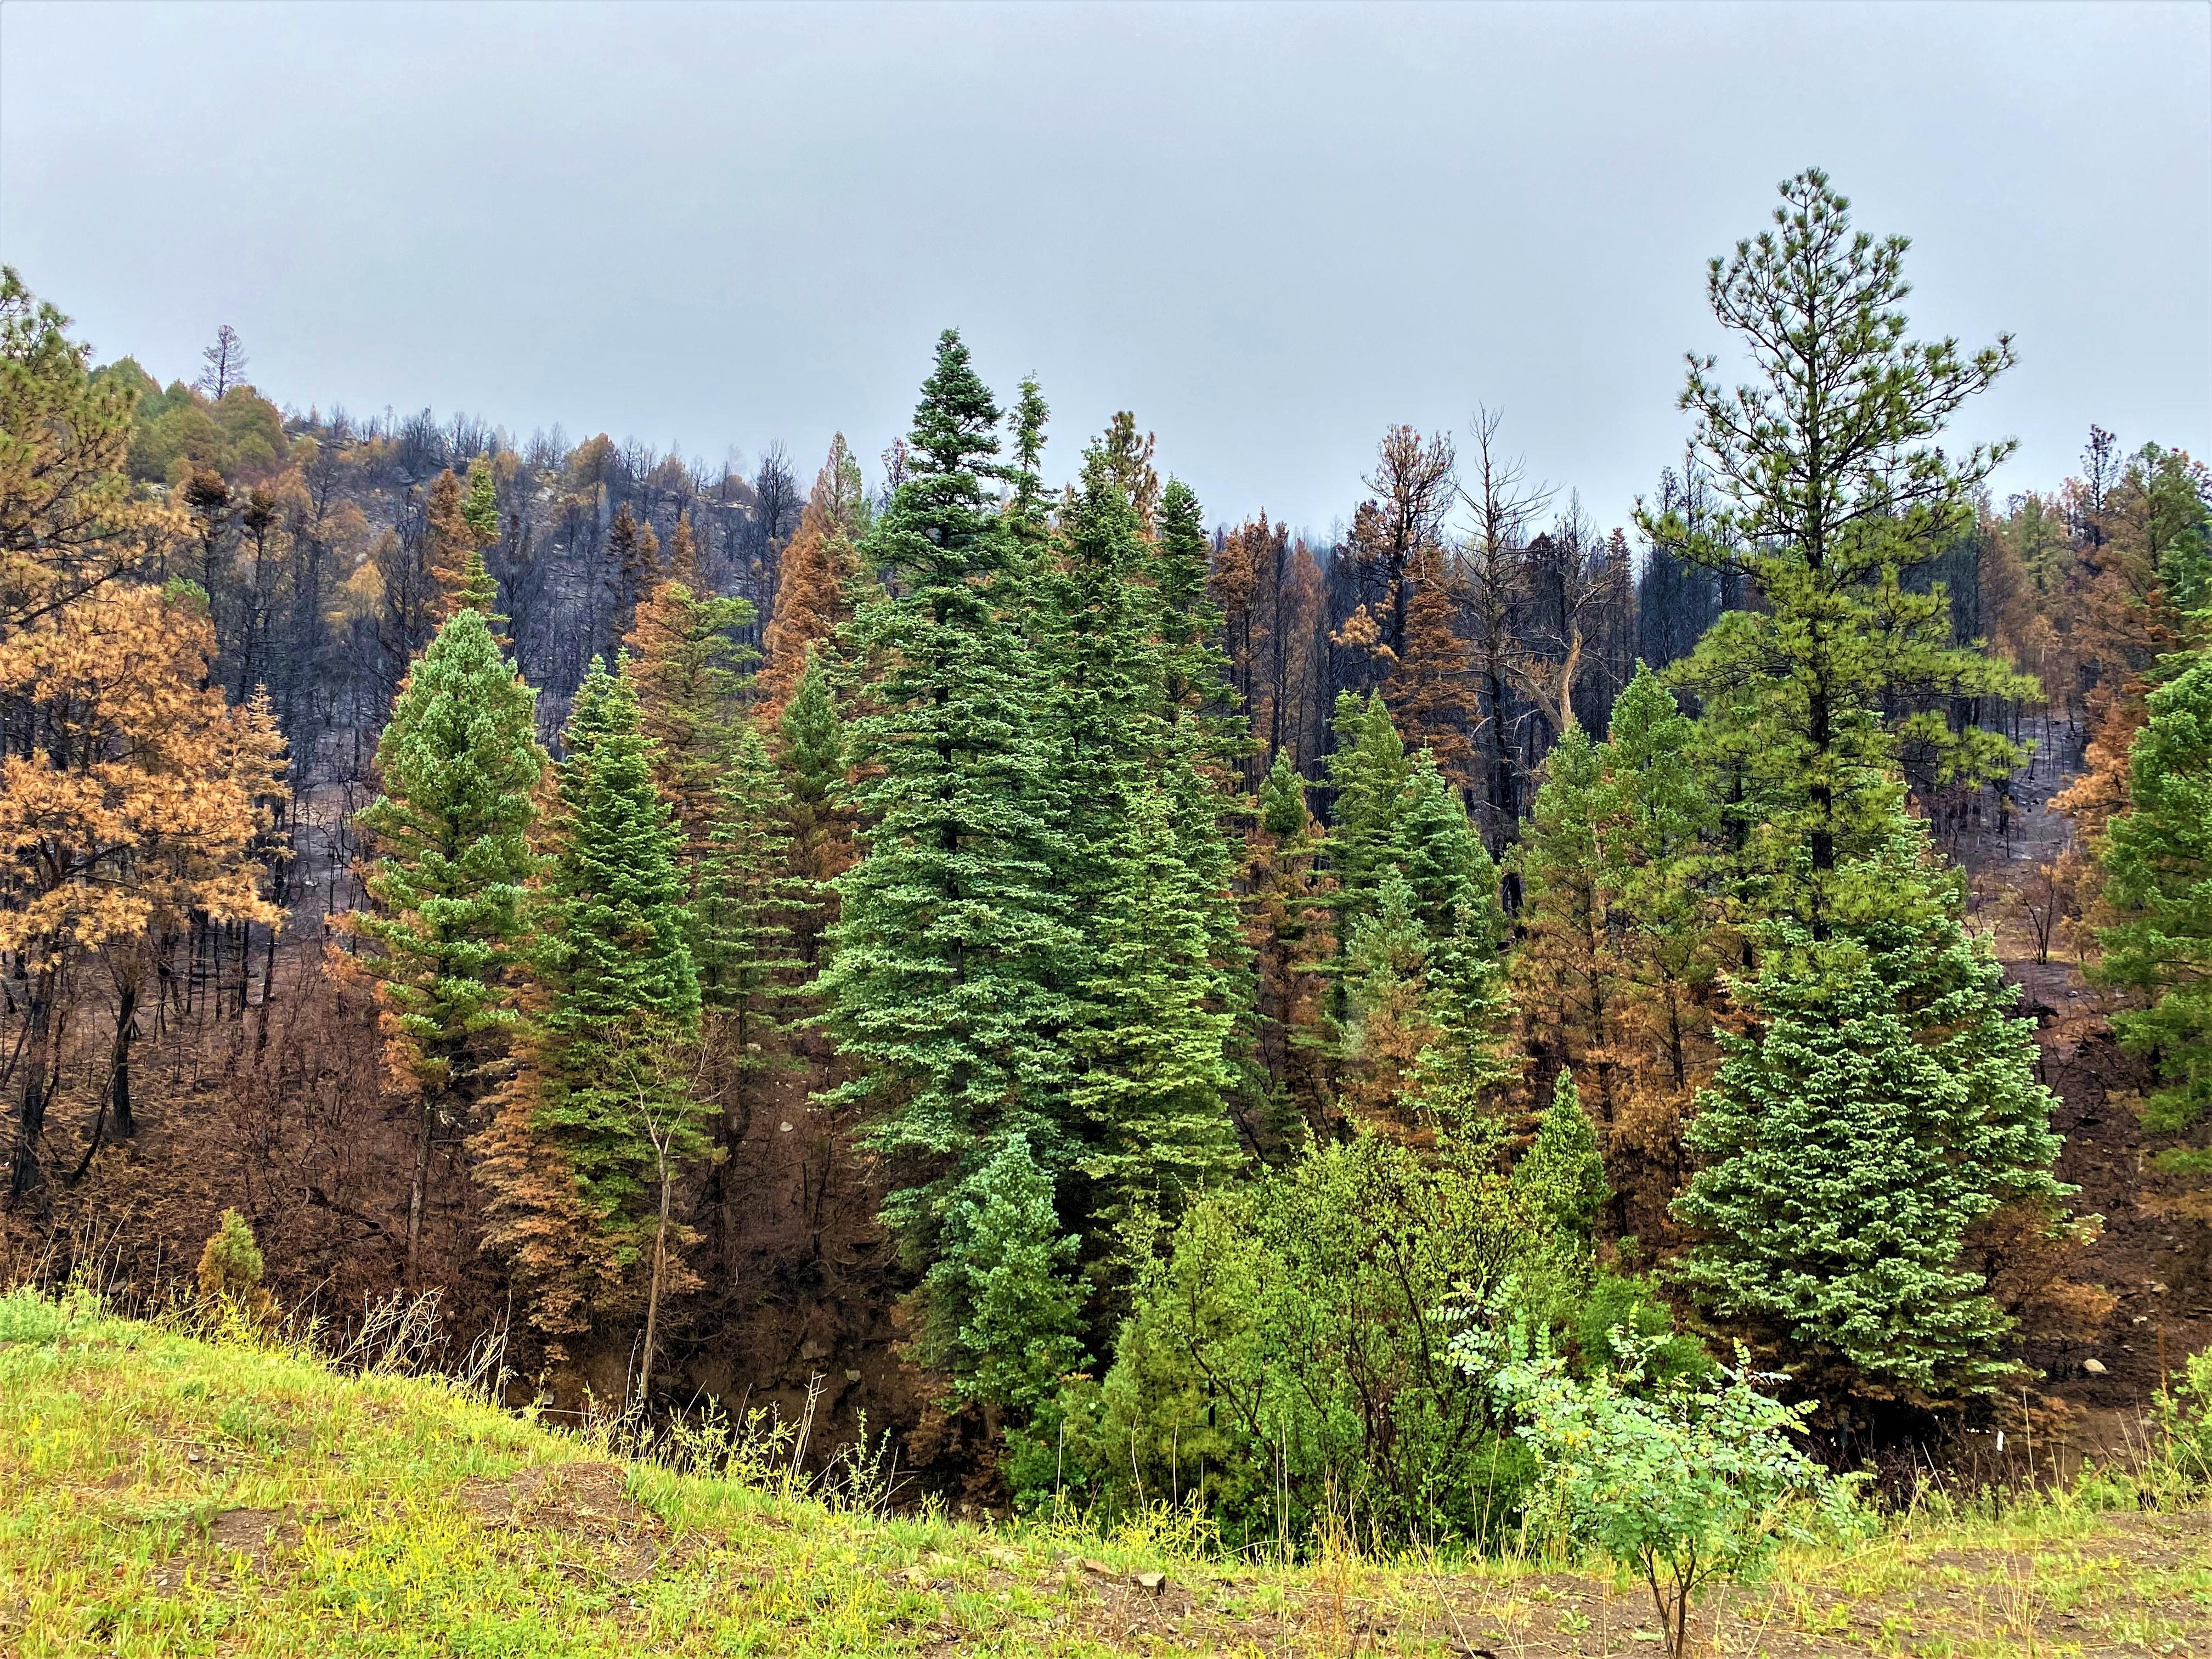 Green fir trees and mixed with burned trees